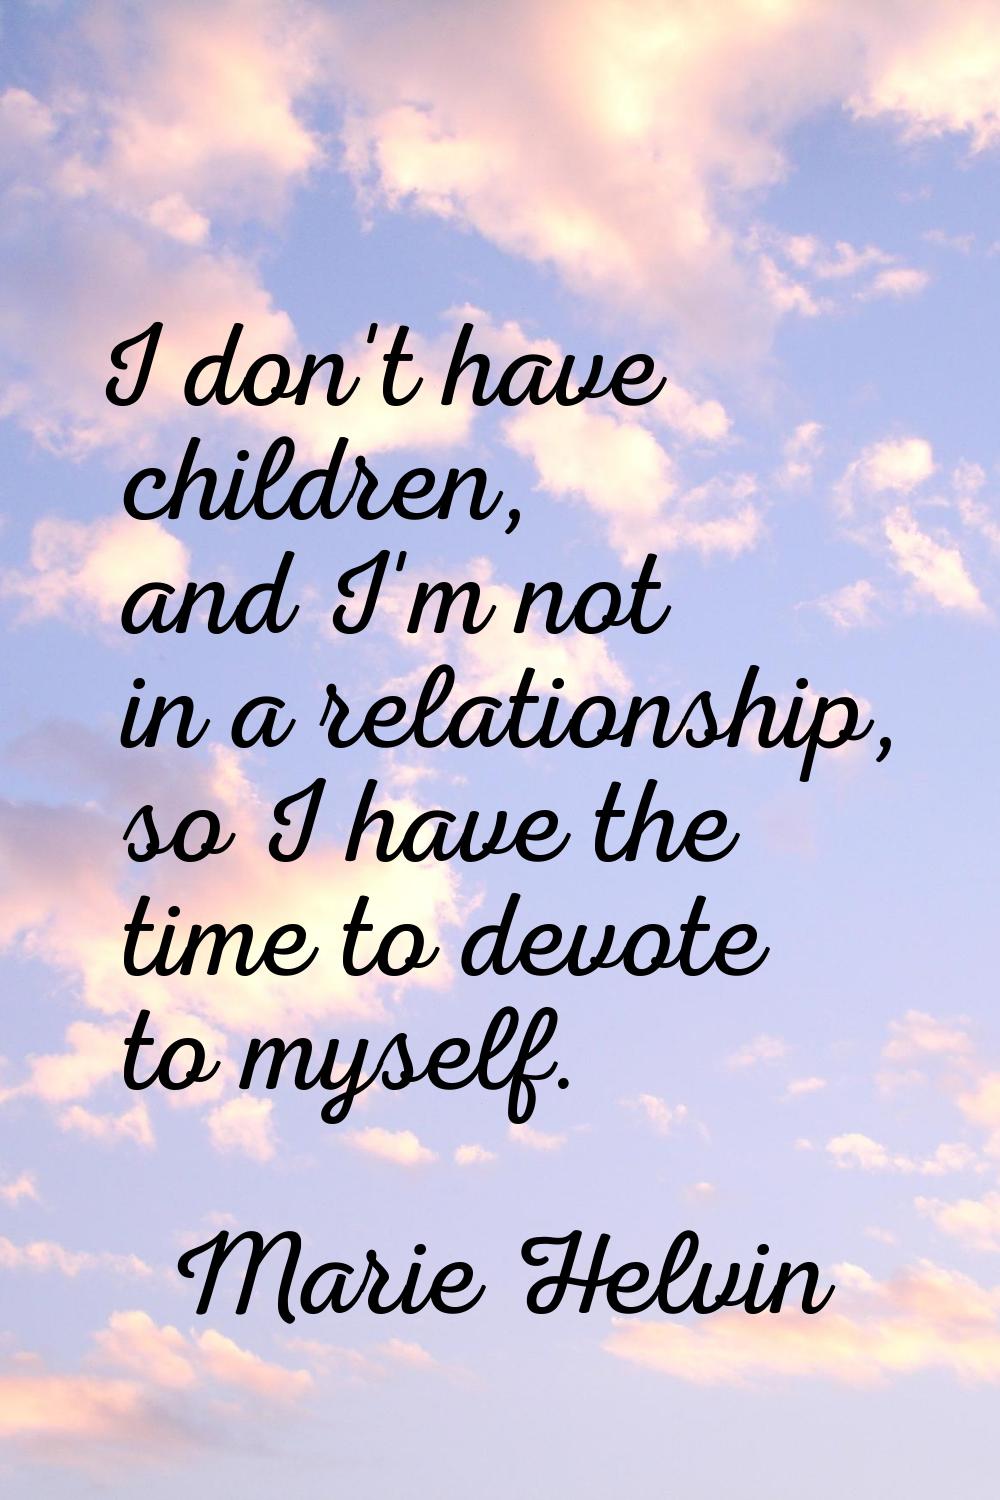 I don't have children, and I'm not in a relationship, so I have the time to devote to myself.